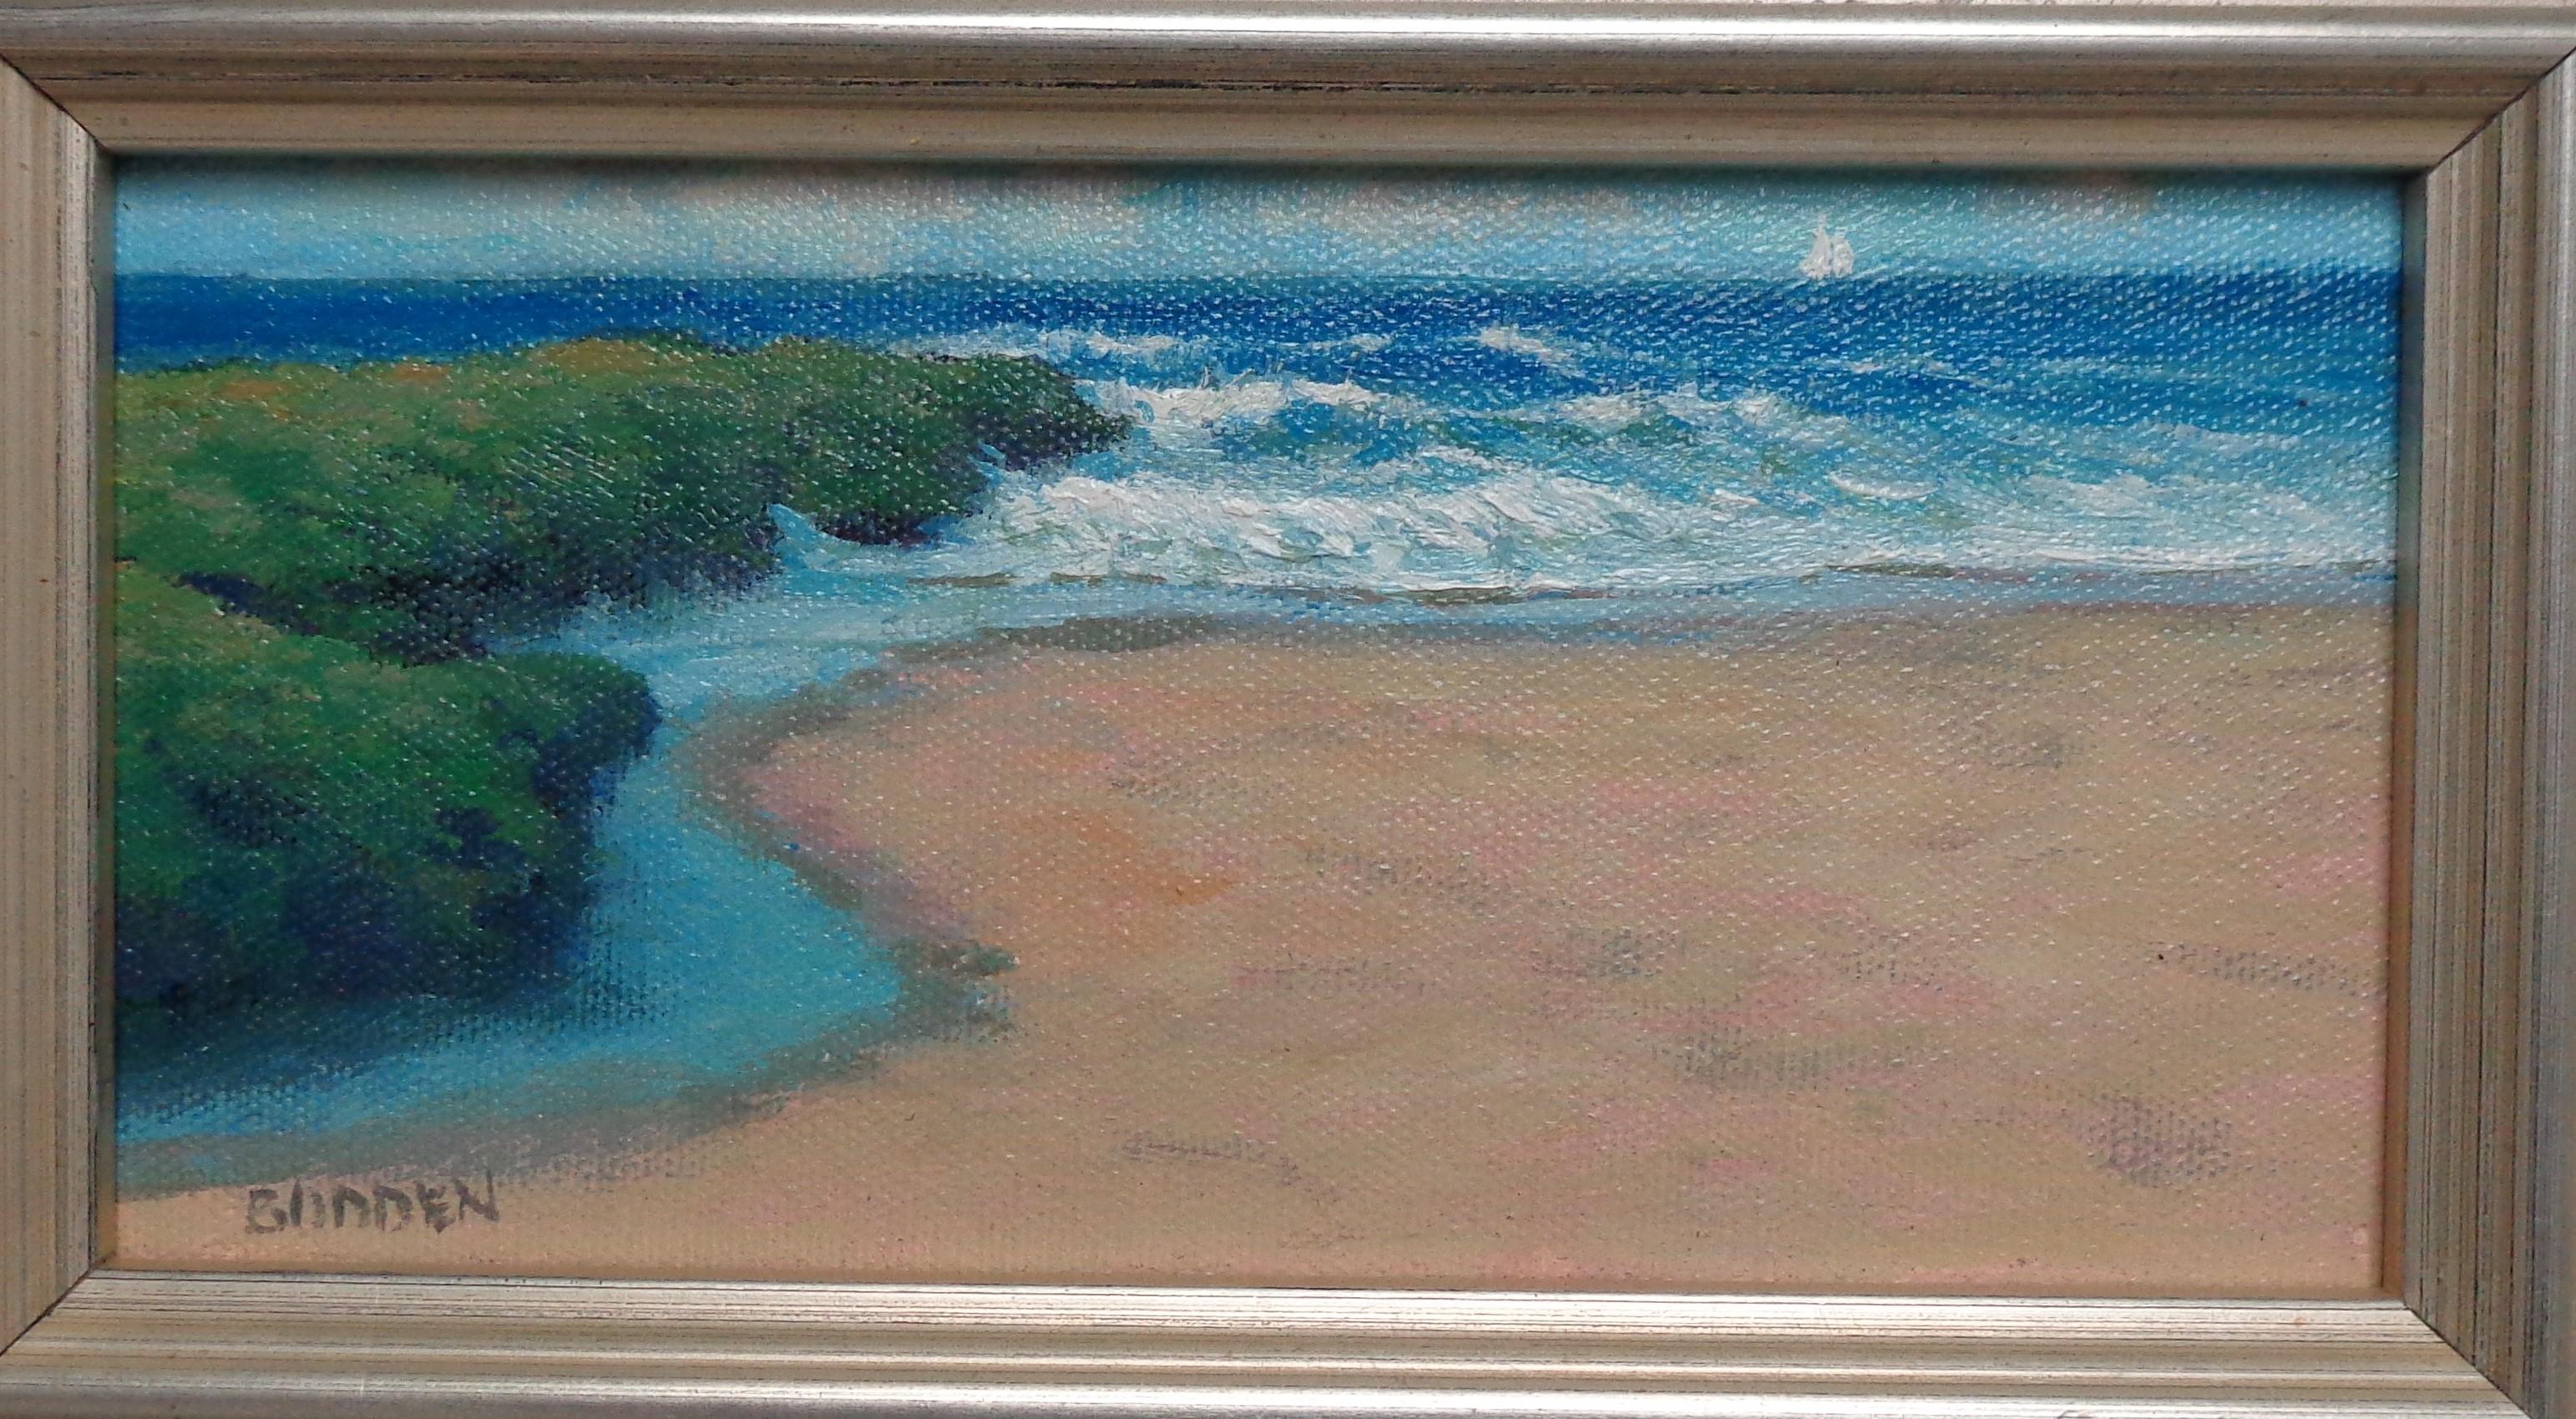 Beach & Ocean Impressionistic Seascape Oil Painting  by Michael Budden For Sale 1